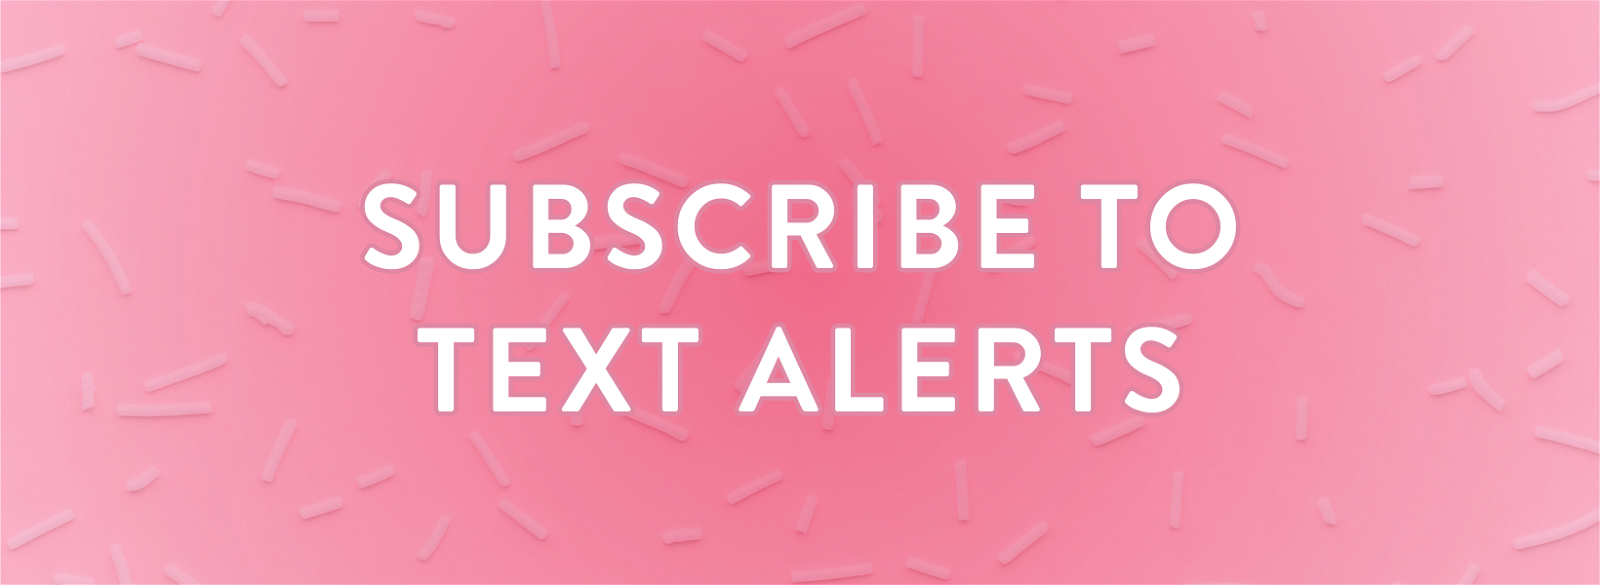 SUBSCRIBE TO TEXT ALERTS